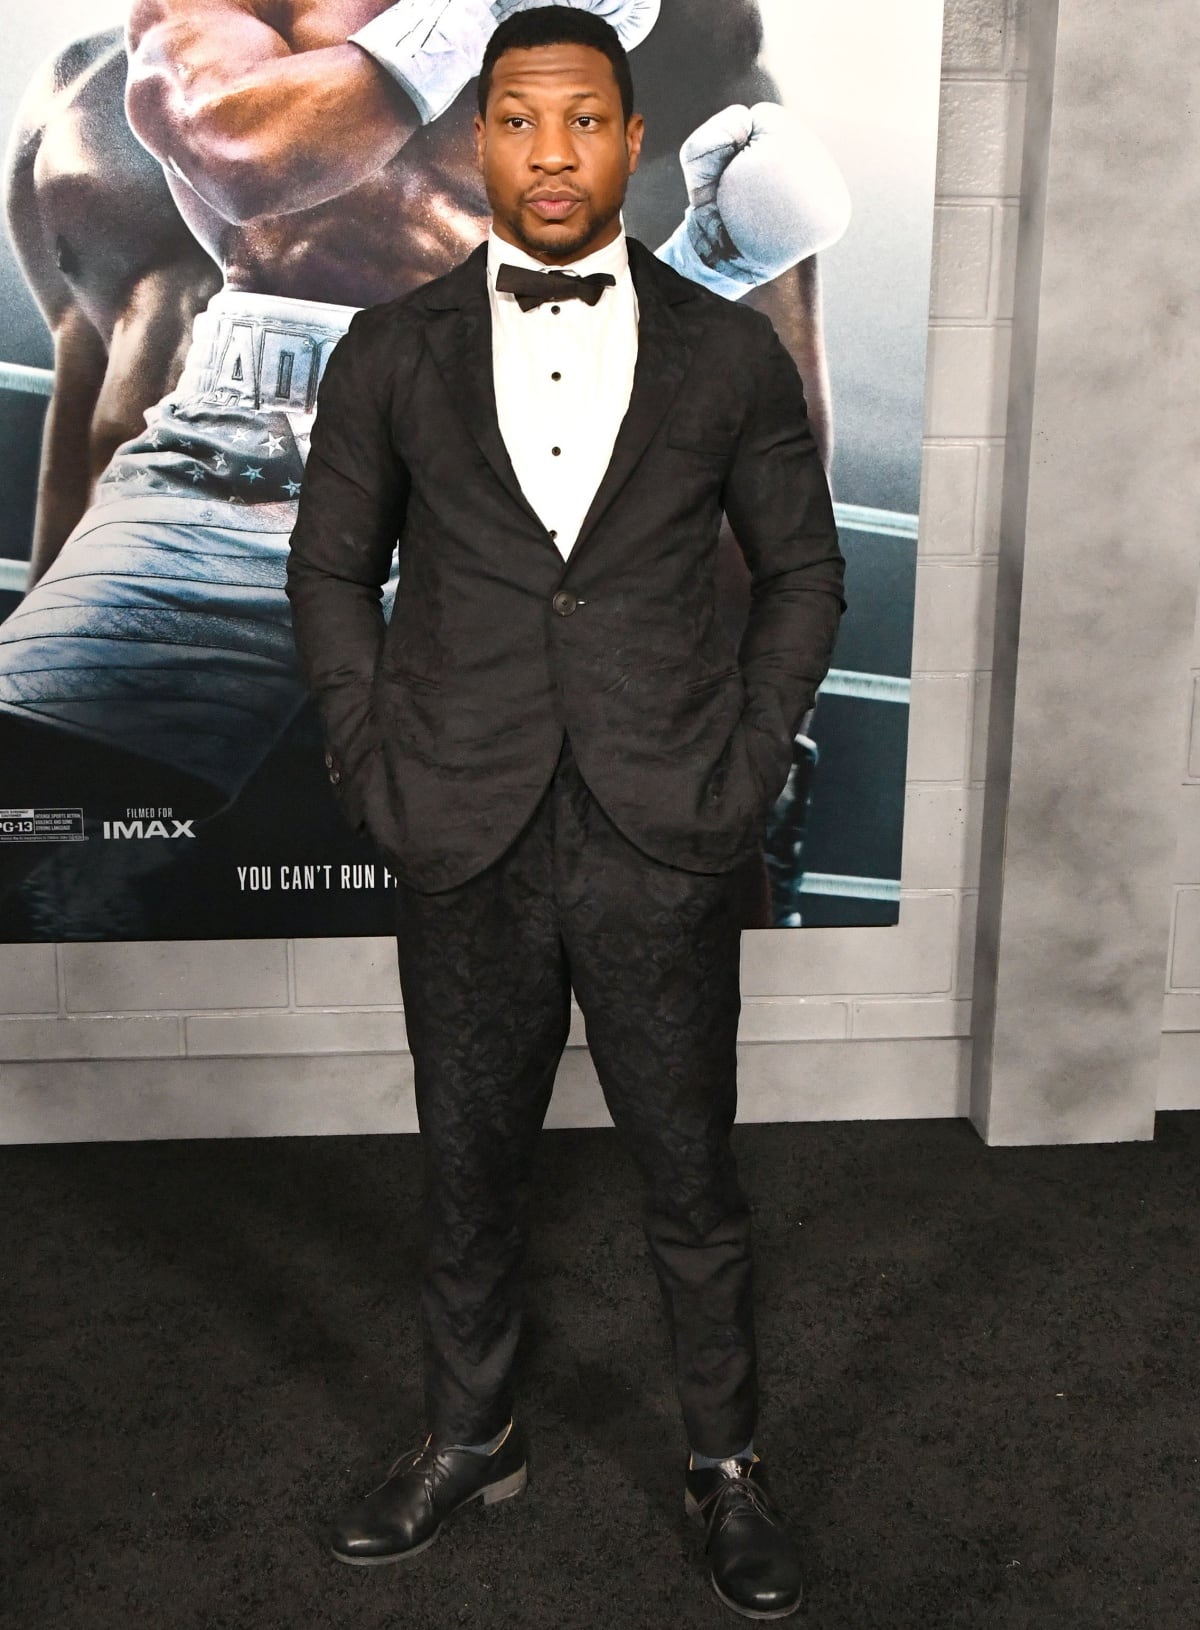 Jonathan Majors stepped out in a patterned black suit at the Los Angeles premiere of Creed III